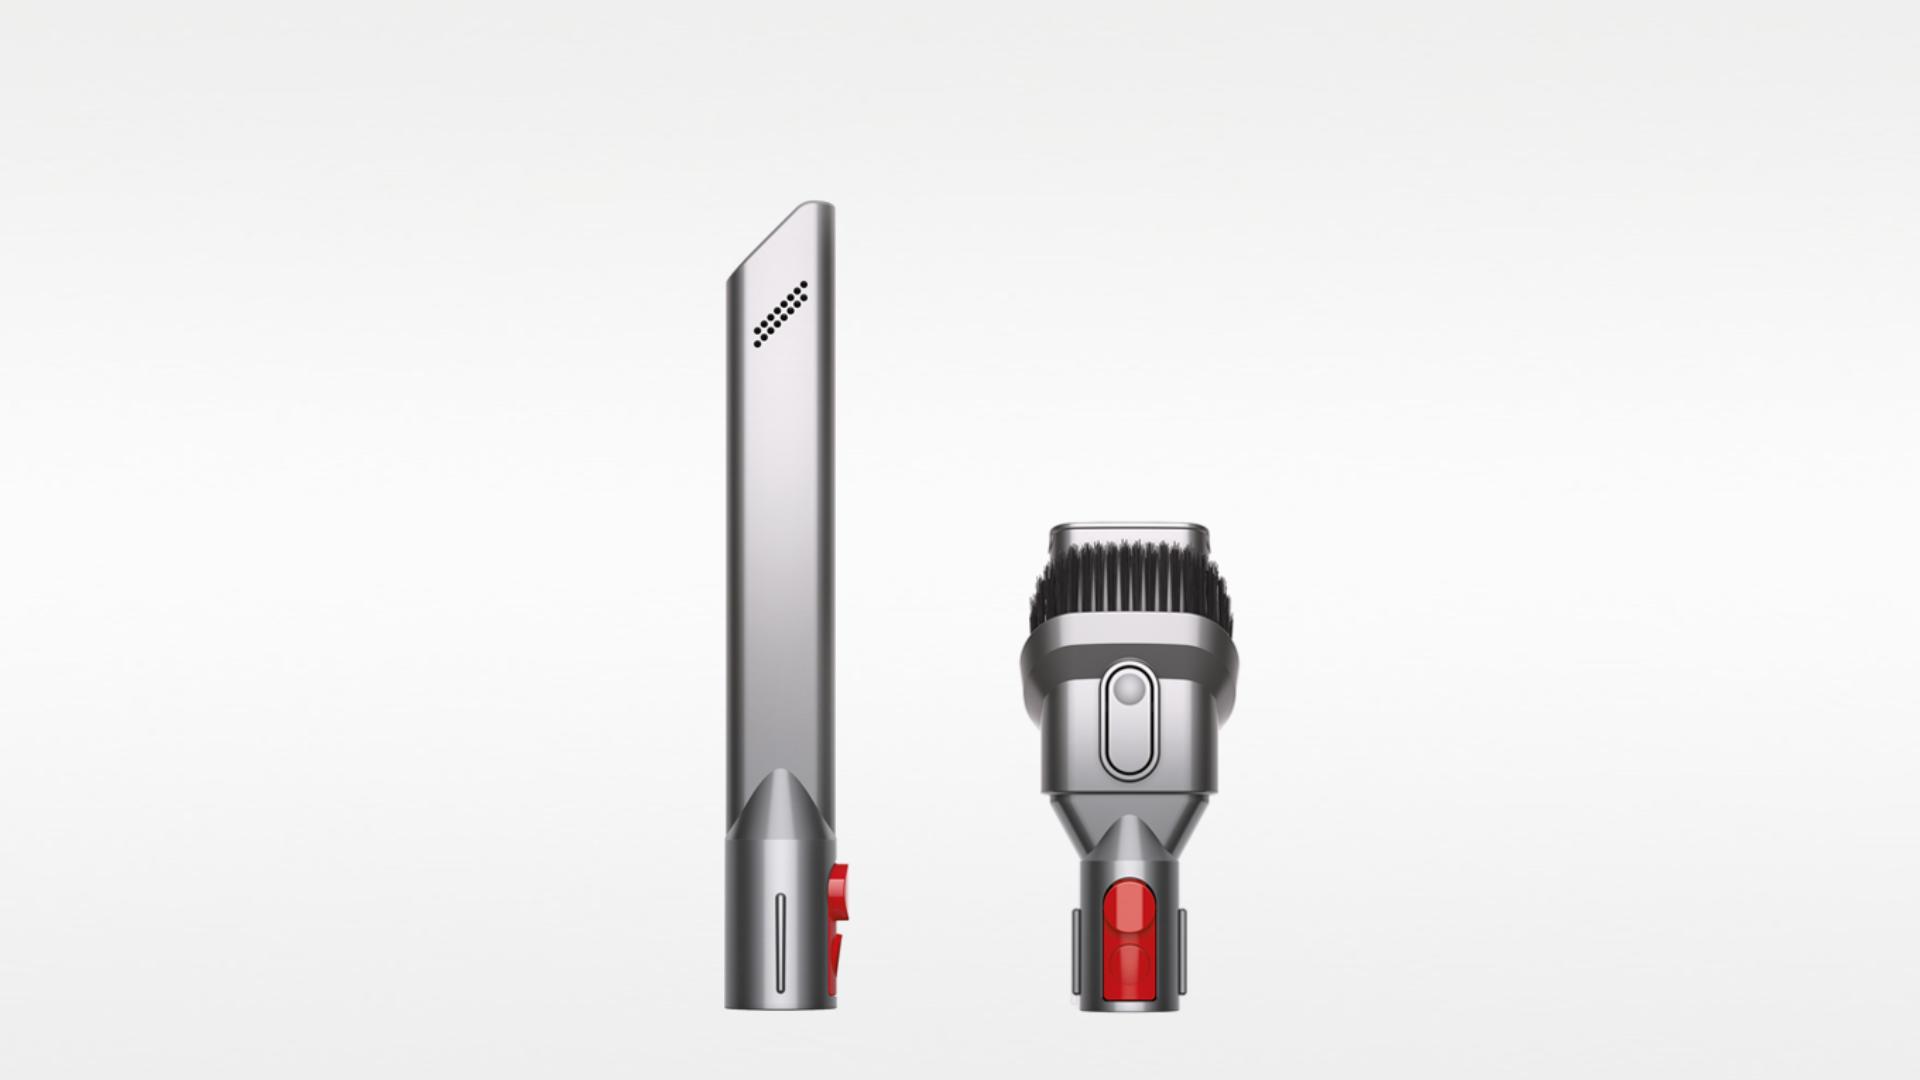 Close-up of Dyson attachment tools.